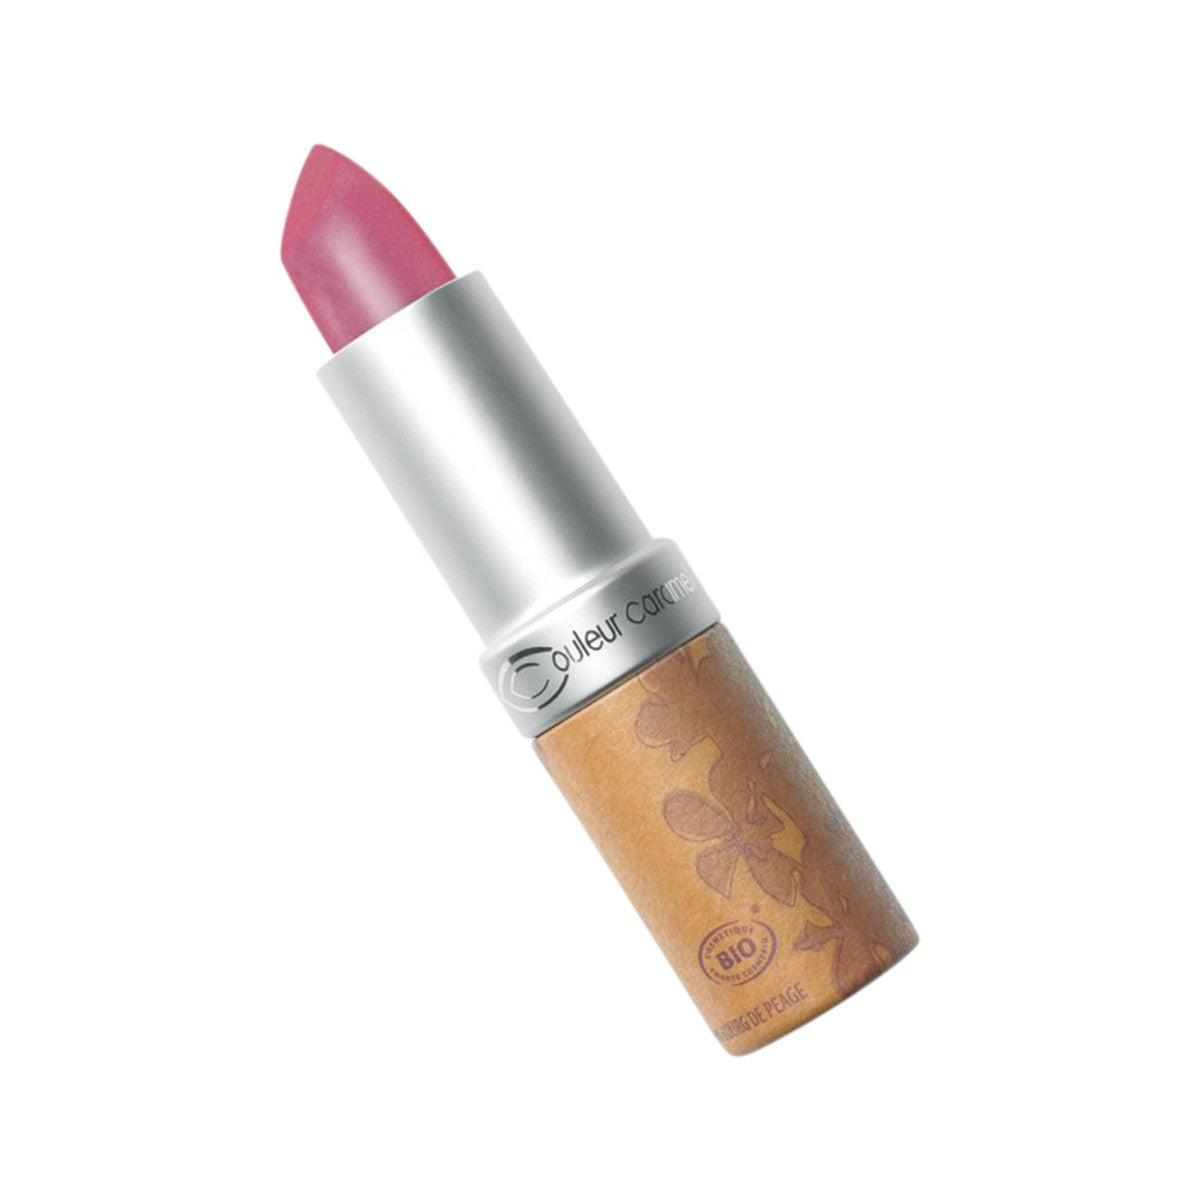 Couleur Caramel - Lipstick Pearly Dark Pink (203)